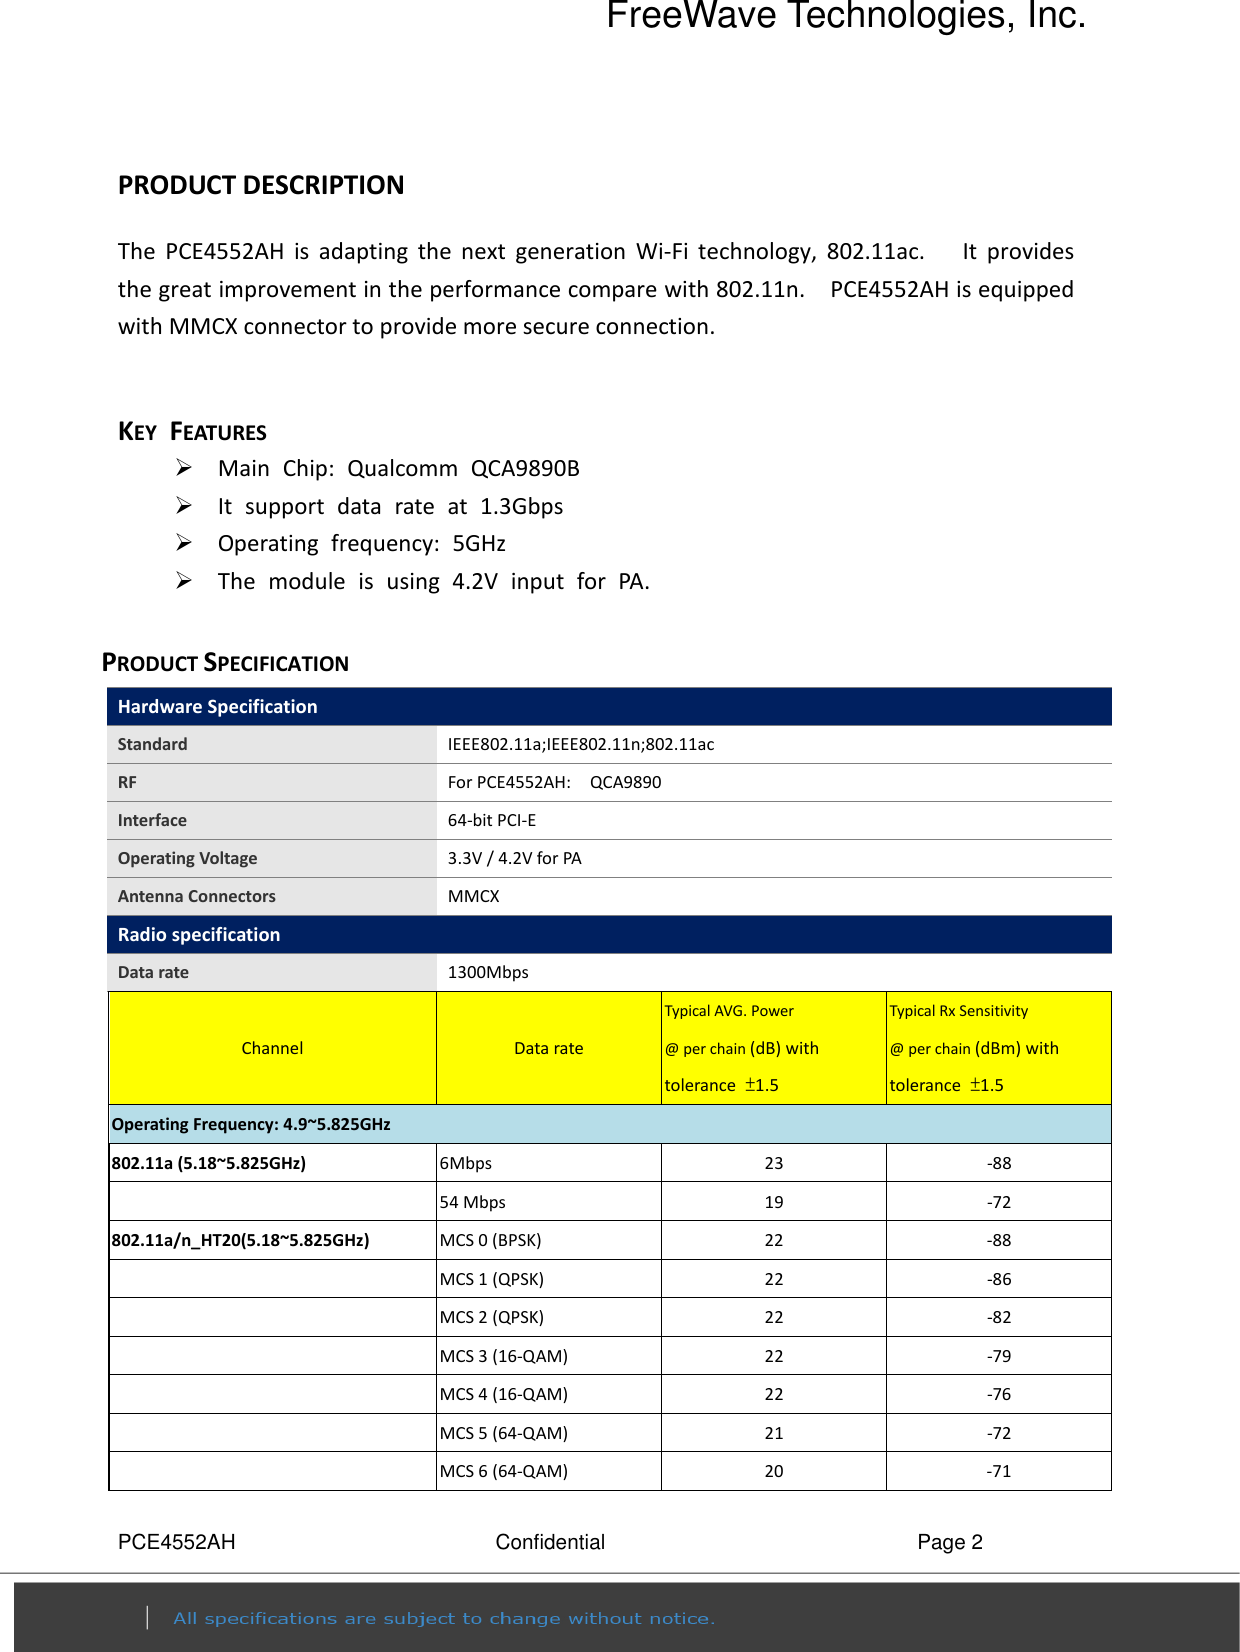 FreeWave Technologies, Inc. PCE4552AH  Confidential  Page 2  PRODUCT DESCRIPTION                       The  PCE4552AH  is  adapting  the  next  generation  Wi-Fi  technology,  802.11ac.      It  provides the great improvement in the performance compare with 802.11n.    PCE4552AH is equipped with MMCX connector to provide more secure connection.  KEY FEATURES    Main  Chip:  Qualcomm  QCA9890B    It  support  data  rate  at  1.3Gbps  Operating  frequency:  5GHz    The  module  is  using  4.2V  input  for  PA.  PRODUCT SPECIFICATION Hardware Specification  Standard  IEEE802.11a;IEEE802.11n;802.11ac RF    For PCE4552AH:    QCA9890 Interface  64-bit PCI-E   Operating Voltage  3.3V / 4.2V for PA Antenna Connectors  MMCX Radio specification  Data rate  1300Mbps Channel  Data rate Typical AVG. Power   @ per chain (dB) with tolerance  ±1.5 Typical Rx Sensitivity @ per chain (dBm) with tolerance  ±1.5 Operating Frequency: 4.9~5.825GHz     802.11a (5.18~5.825GHz)  6Mbps  23  -88  54 Mbps  19  -72 802.11a/n_HT20(5.18~5.825GHz)  MCS 0 (BPSK)  22  -88  MCS 1 (QPSK)  22  -86  MCS 2 (QPSK)  22  -82  MCS 3 (16-QAM)  22  -79  MCS 4 (16-QAM)  22  -76  MCS 5 (64-QAM)  21  -72  MCS 6 (64-QAM)  20  -71 